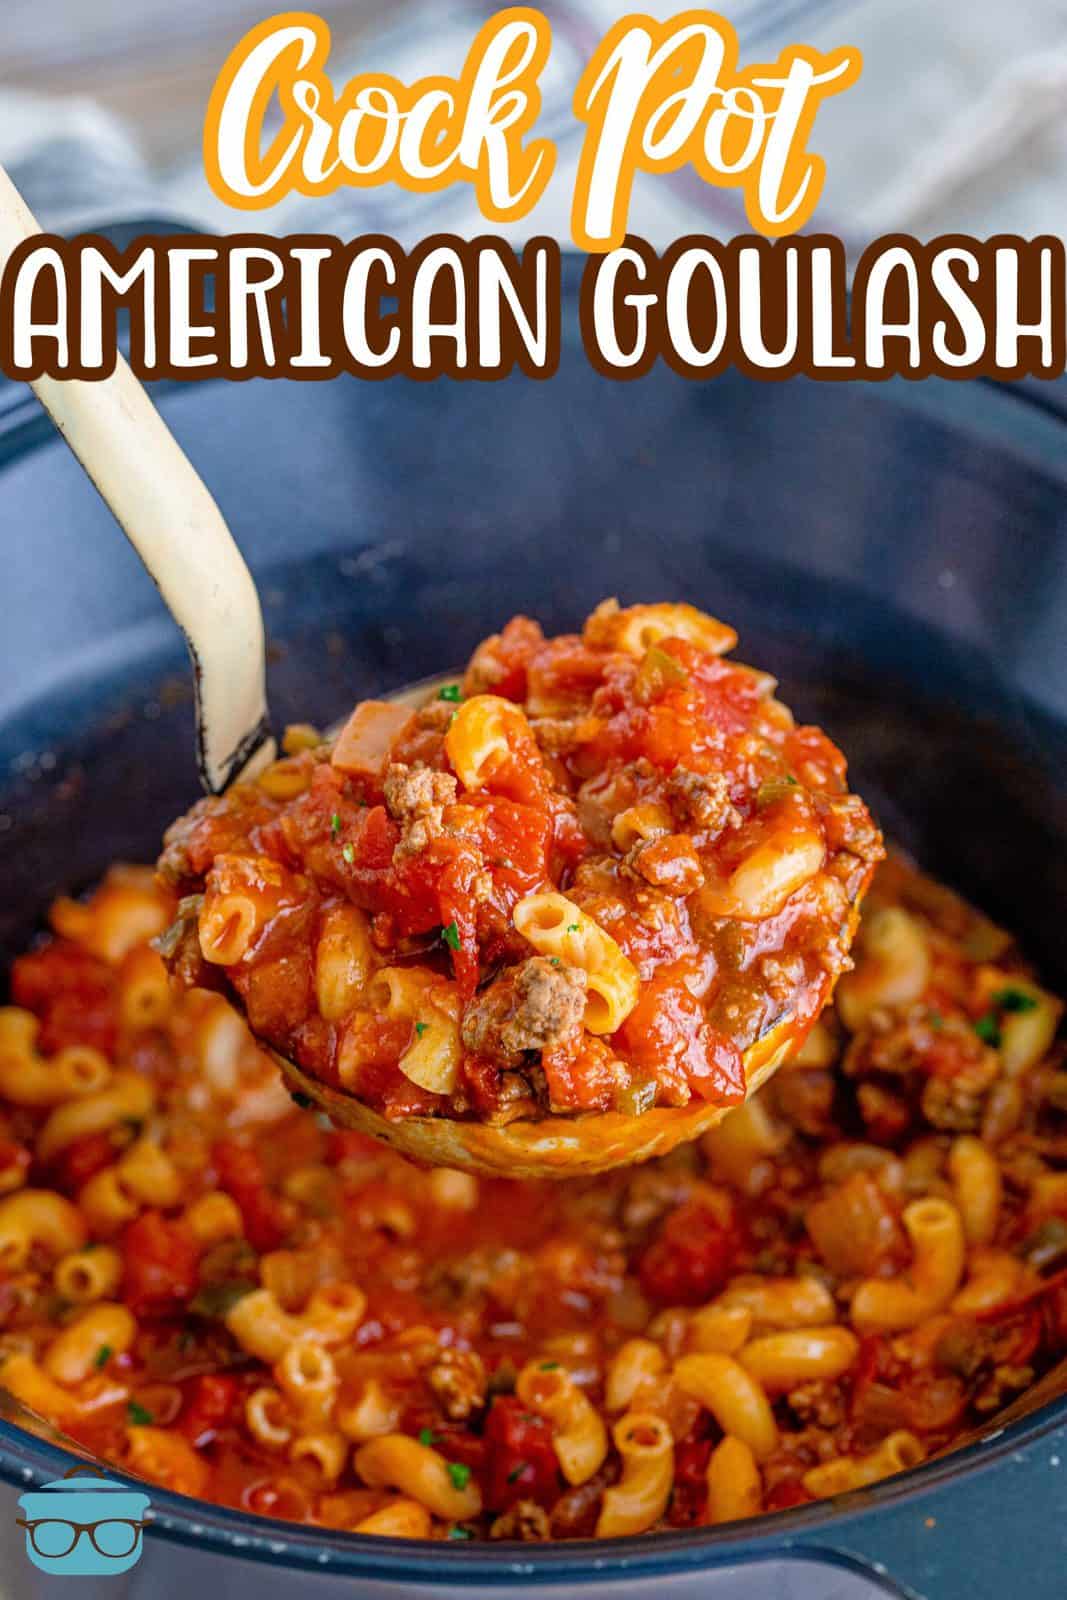 Pinterest image of Crock Pot American Goulash in crock pot with ladle holding up some of the goulash.